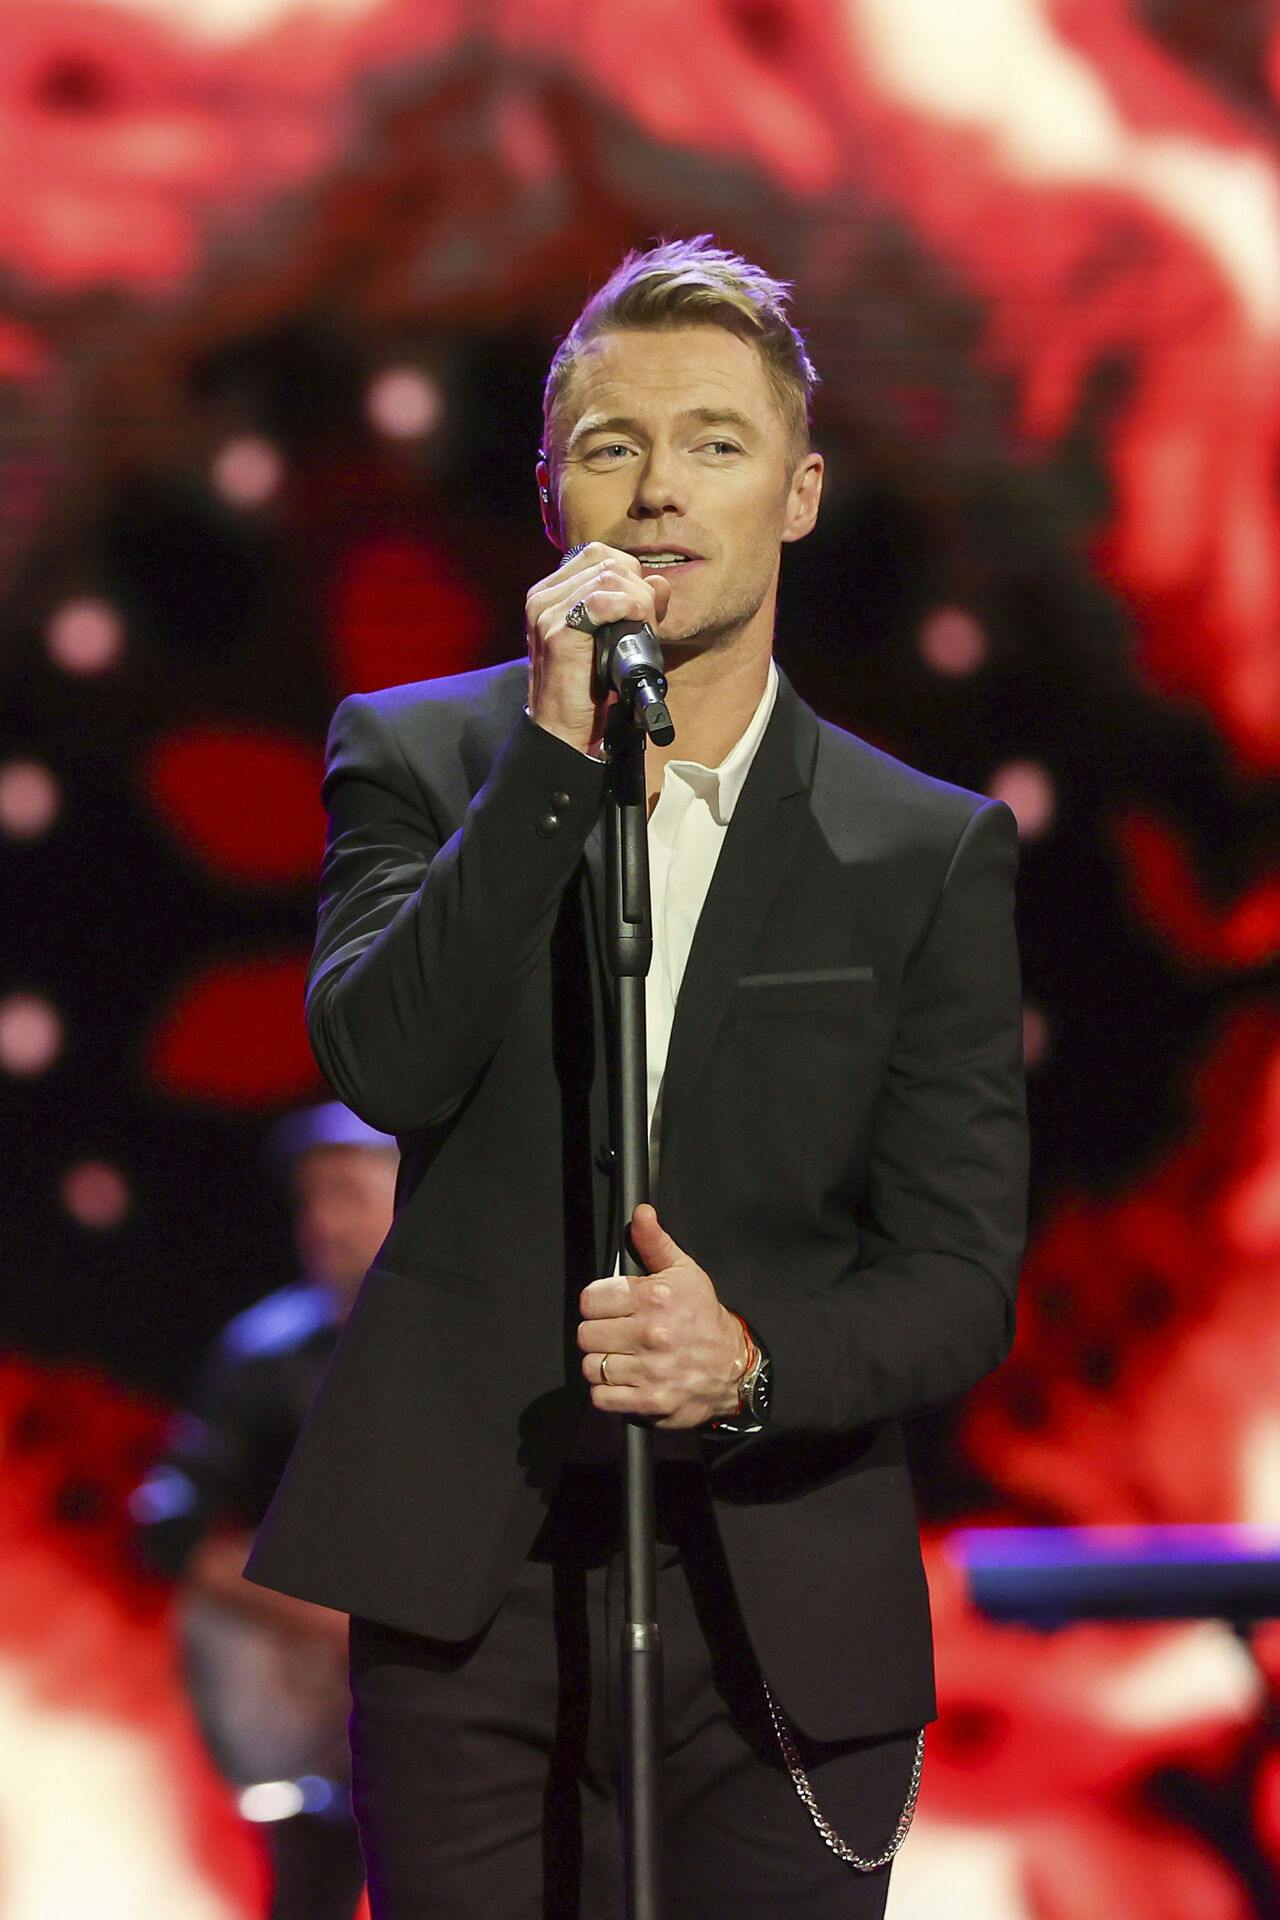 06 August 2020, Saxony, Leipzig: The Irish singer Ronan Keating sings in the Roland Kaiser Show with the title "Love can save us". Because of Corona only a few people were allowed into the studio. Photo by: Jan Woitas/picture-alliance/dpa/AP Images